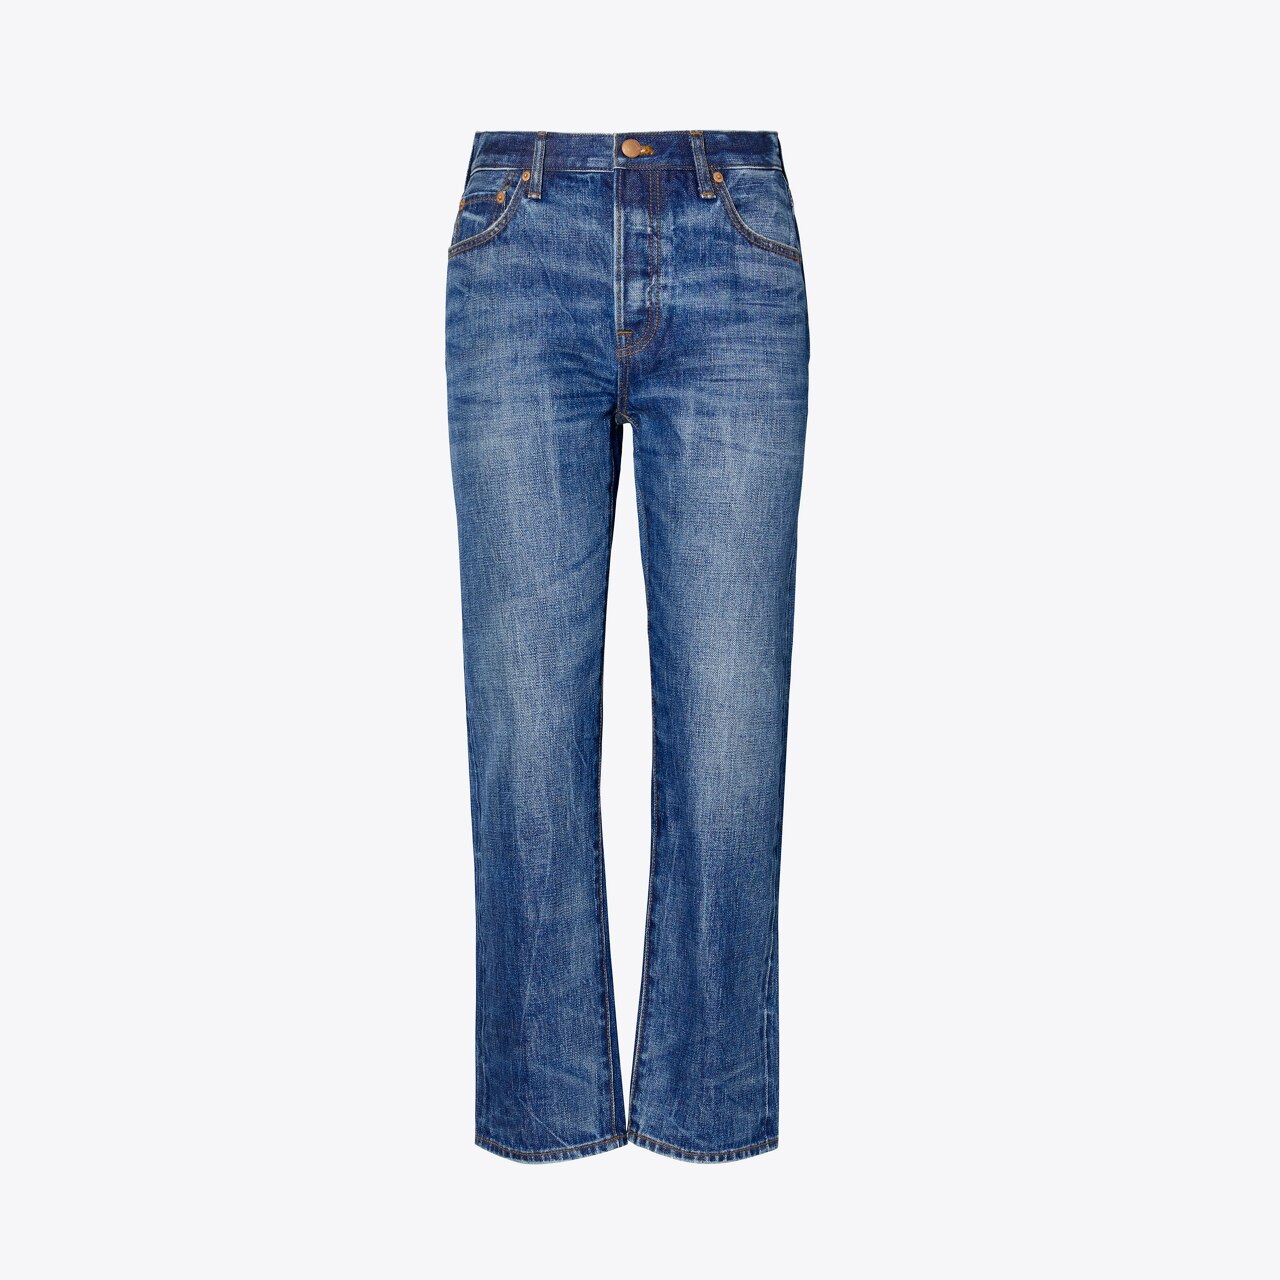 https://s7.toryburch.com/is/image/ToryBurch/style/classic-denim-jean-front.TB_139860_466_SLFRO.pdp-1280x1280.jpg